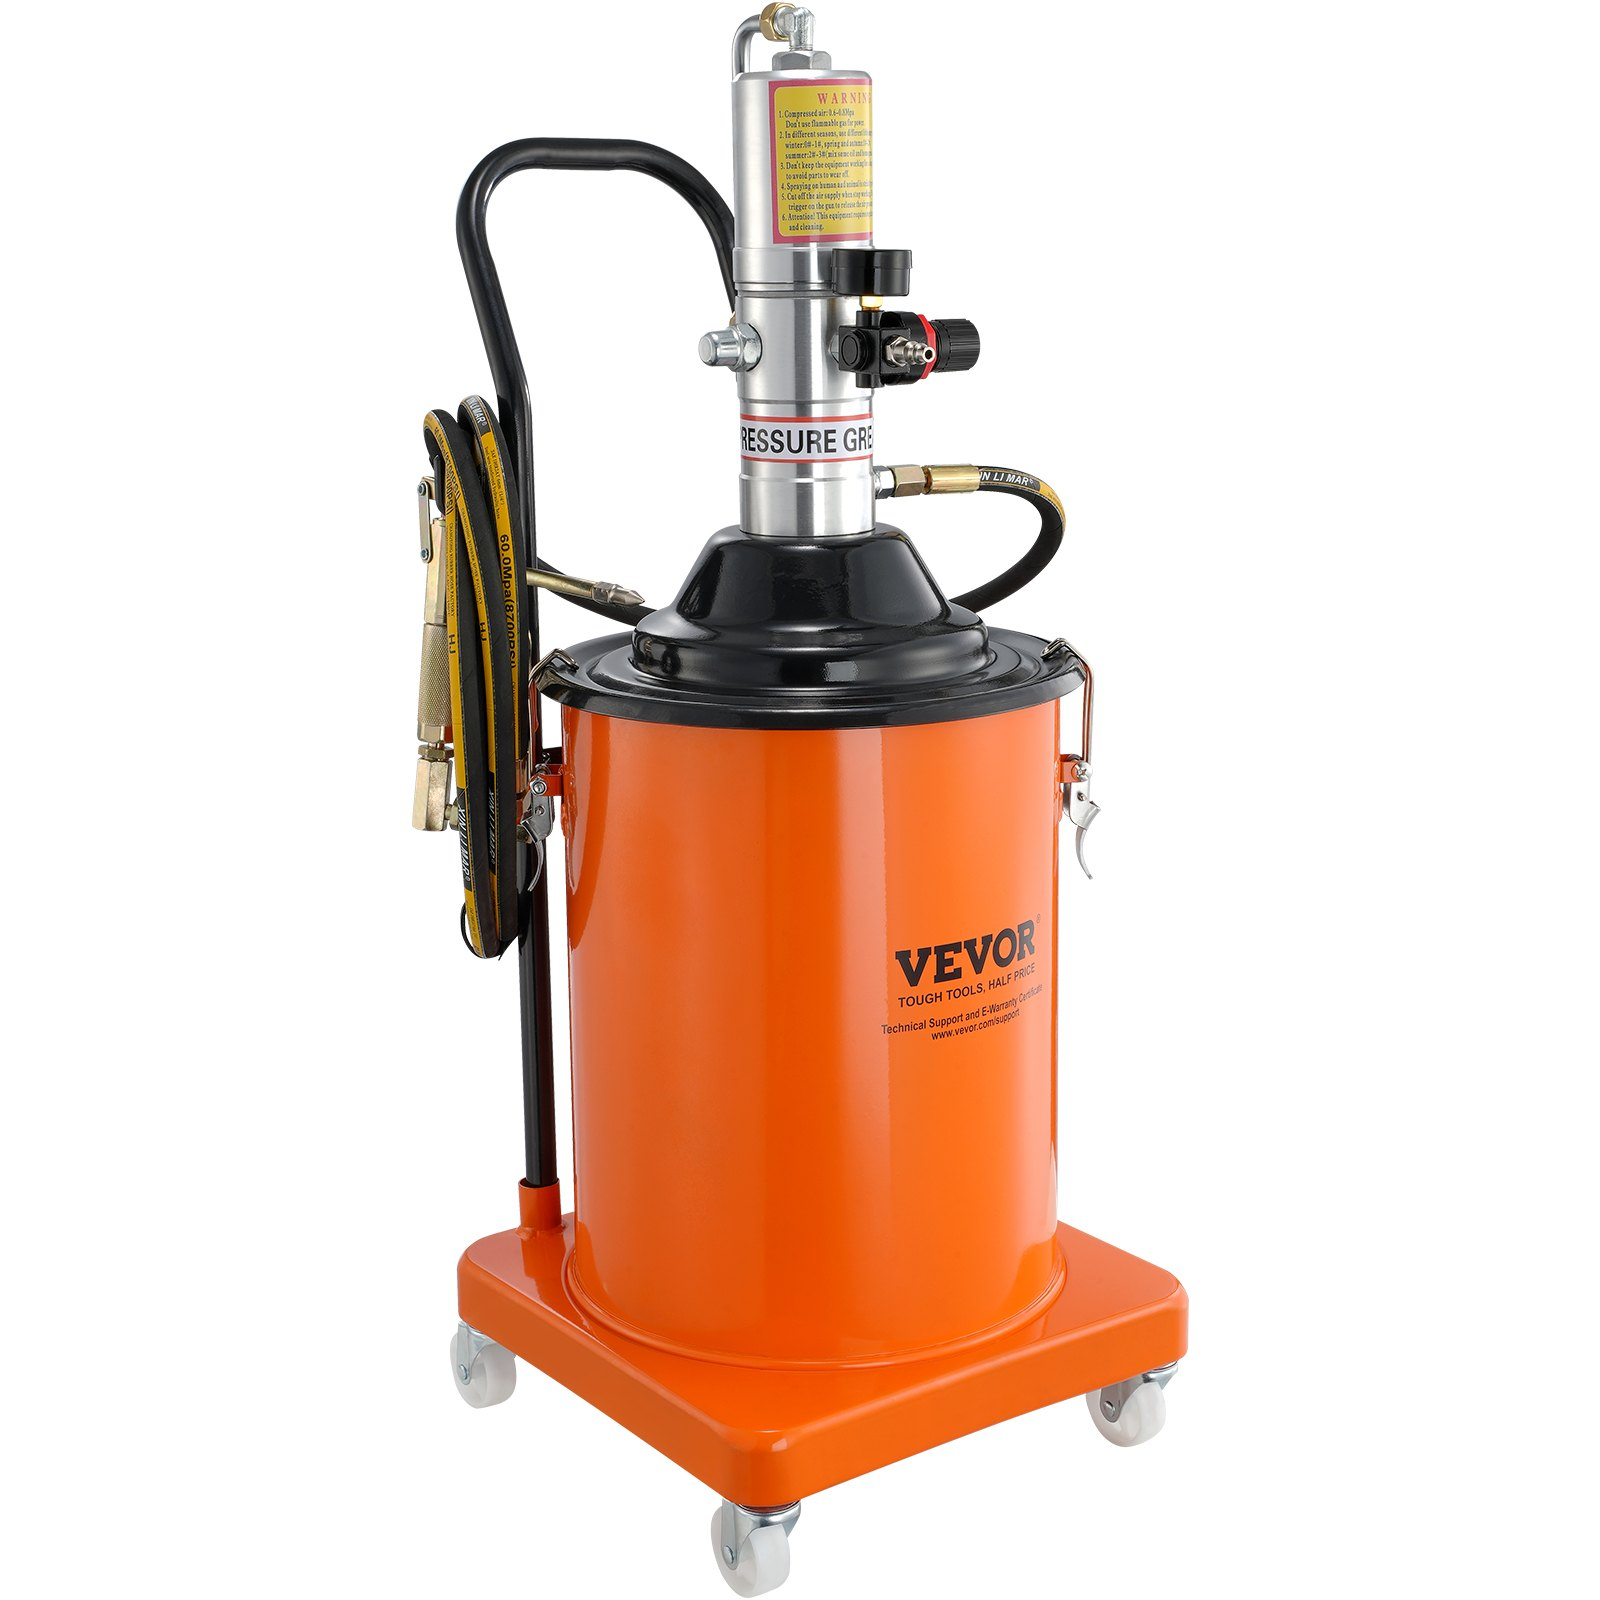 VEVOR Grease Pump, 5 Gallon 20L, Air Operated Grease Pump with 13 ft High Pressure Hose and Grease Gun, Pneumatic Grease Bucket Pump with Wheels, Portable Lubrication Grease Pump 50:1 Pressure Ratio, Goodies N Stuff